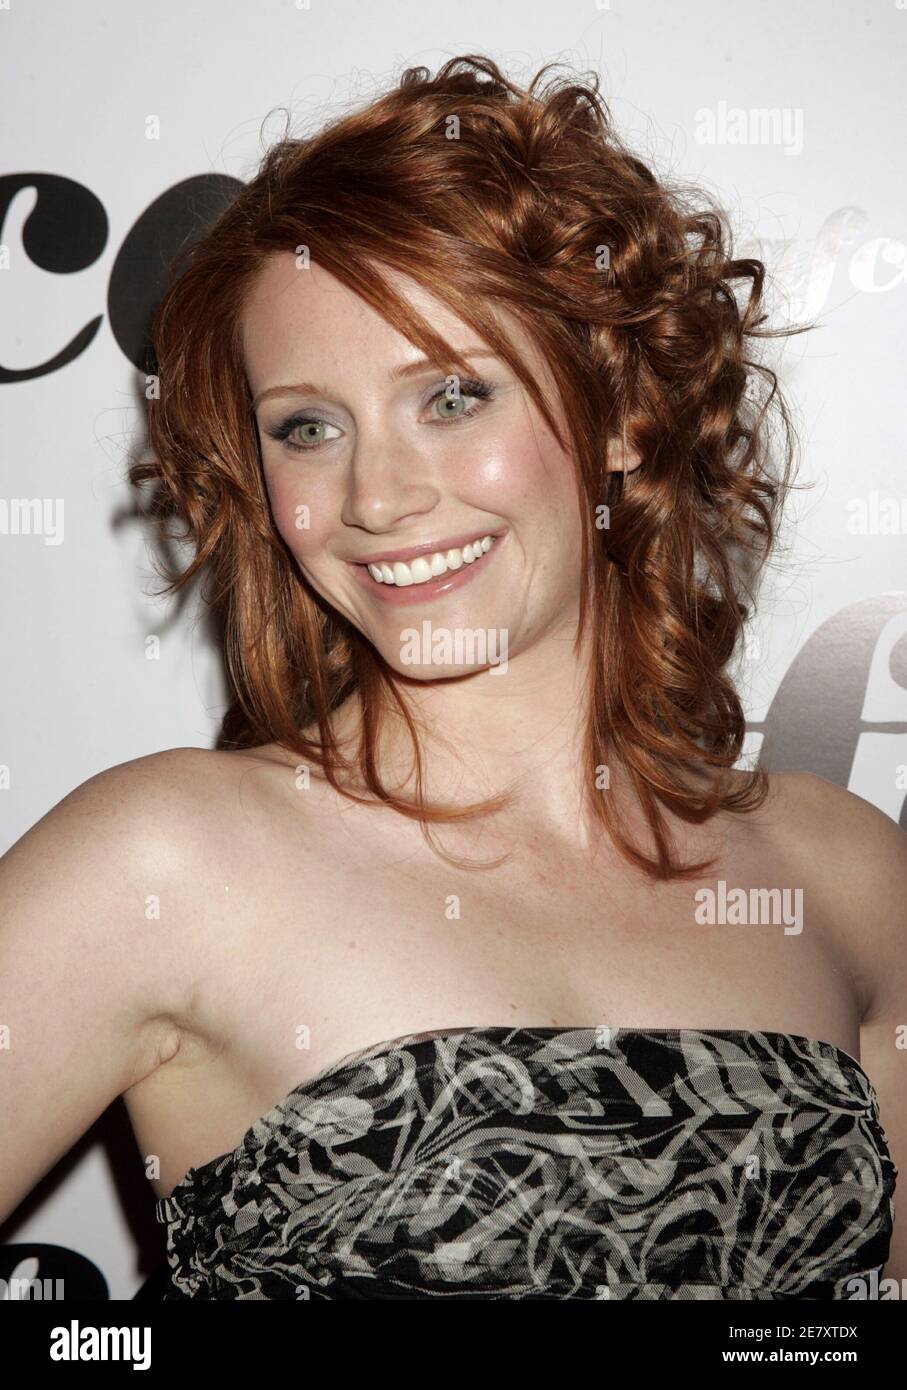 Actress Bryce Dallas Howard poses as she arrives as a guest at the Los Angeles Film Critics Association awards ceremony in Los Angeles, California January 17, 2006. Stock Photo